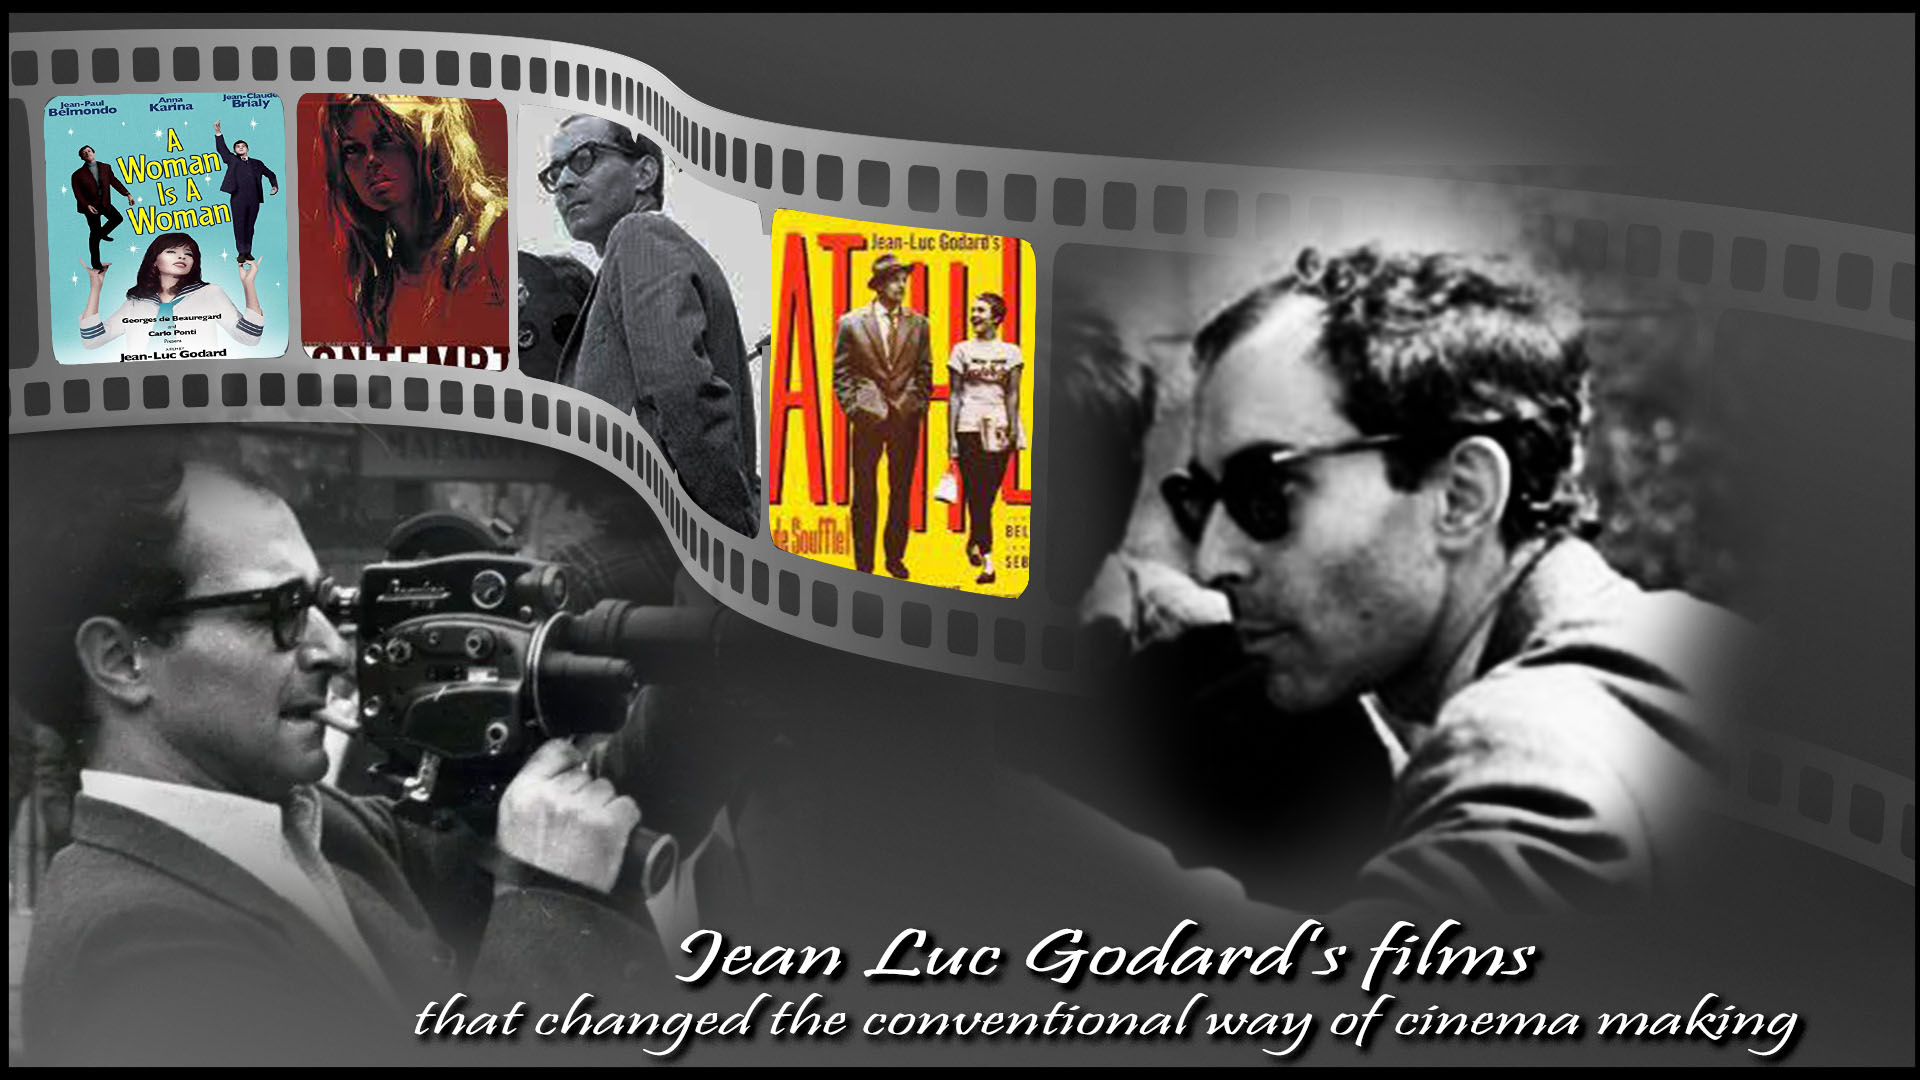 Jean Luc Godard’s films that changed the conventional way of cinema making